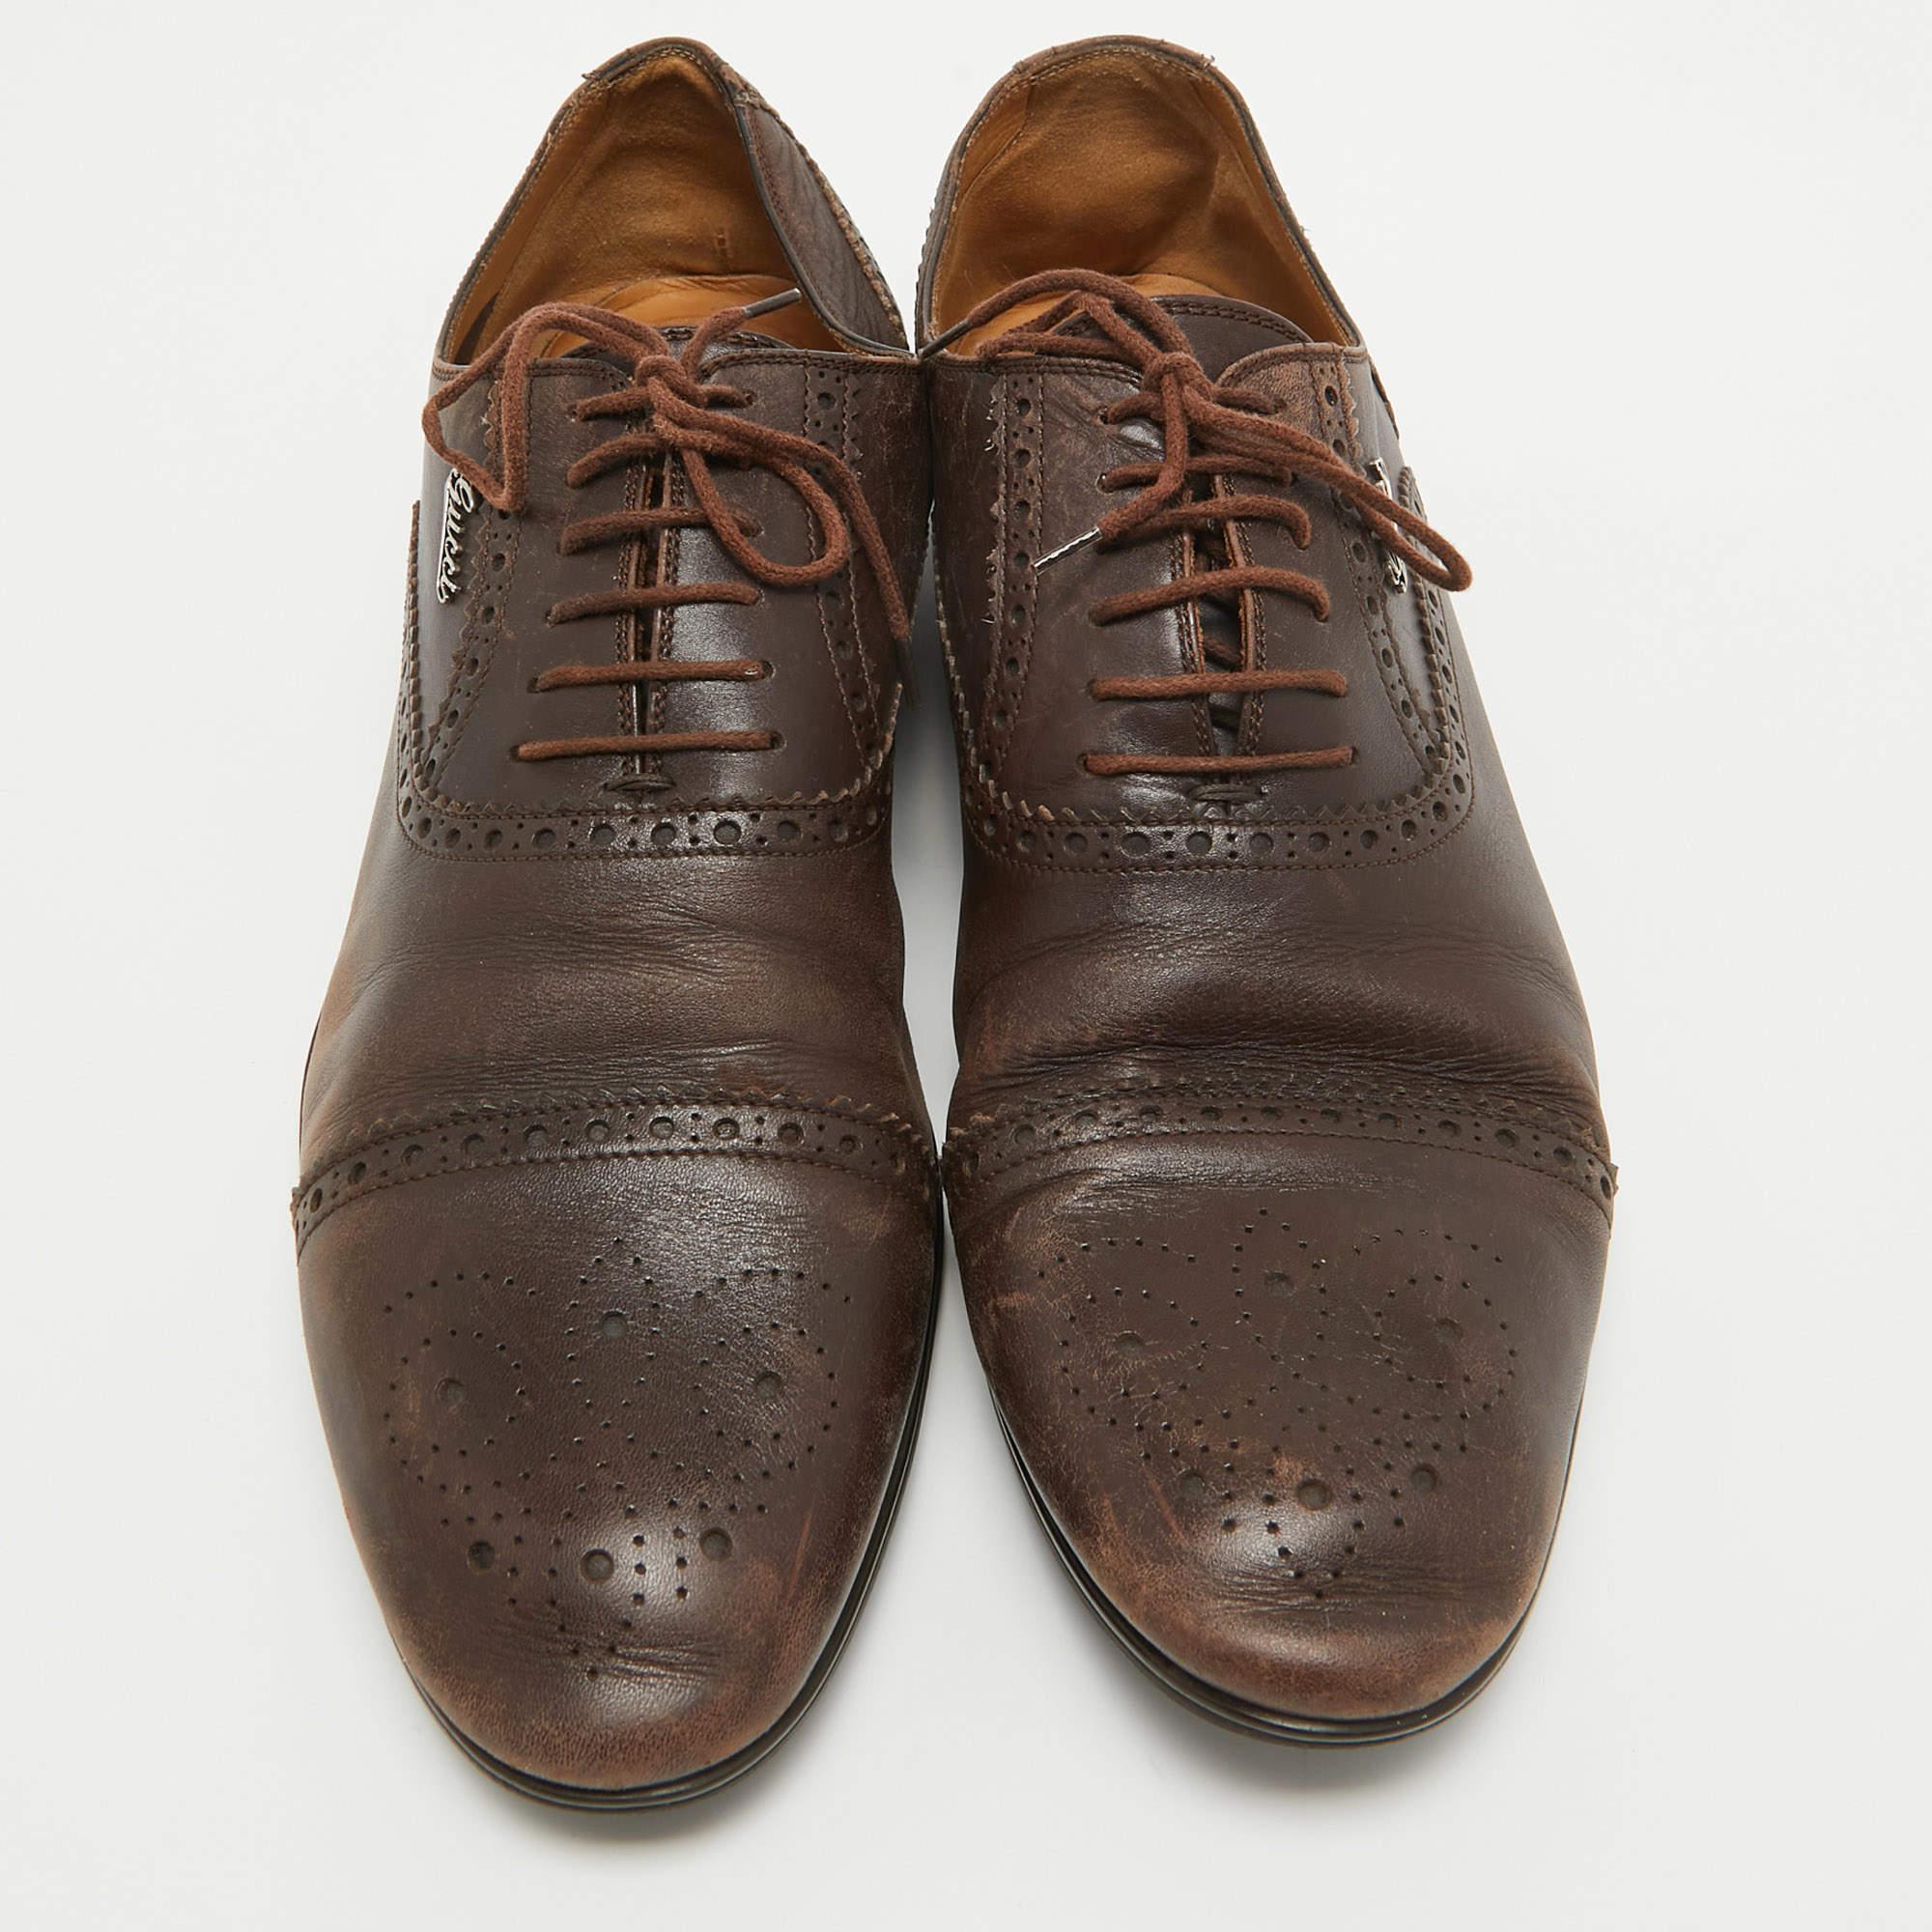 You'll find this pair of Gucci oxfords for men an essential addition to your shoe collection. Crafted immaculately, the shoes are constructed to give you a polished look.

